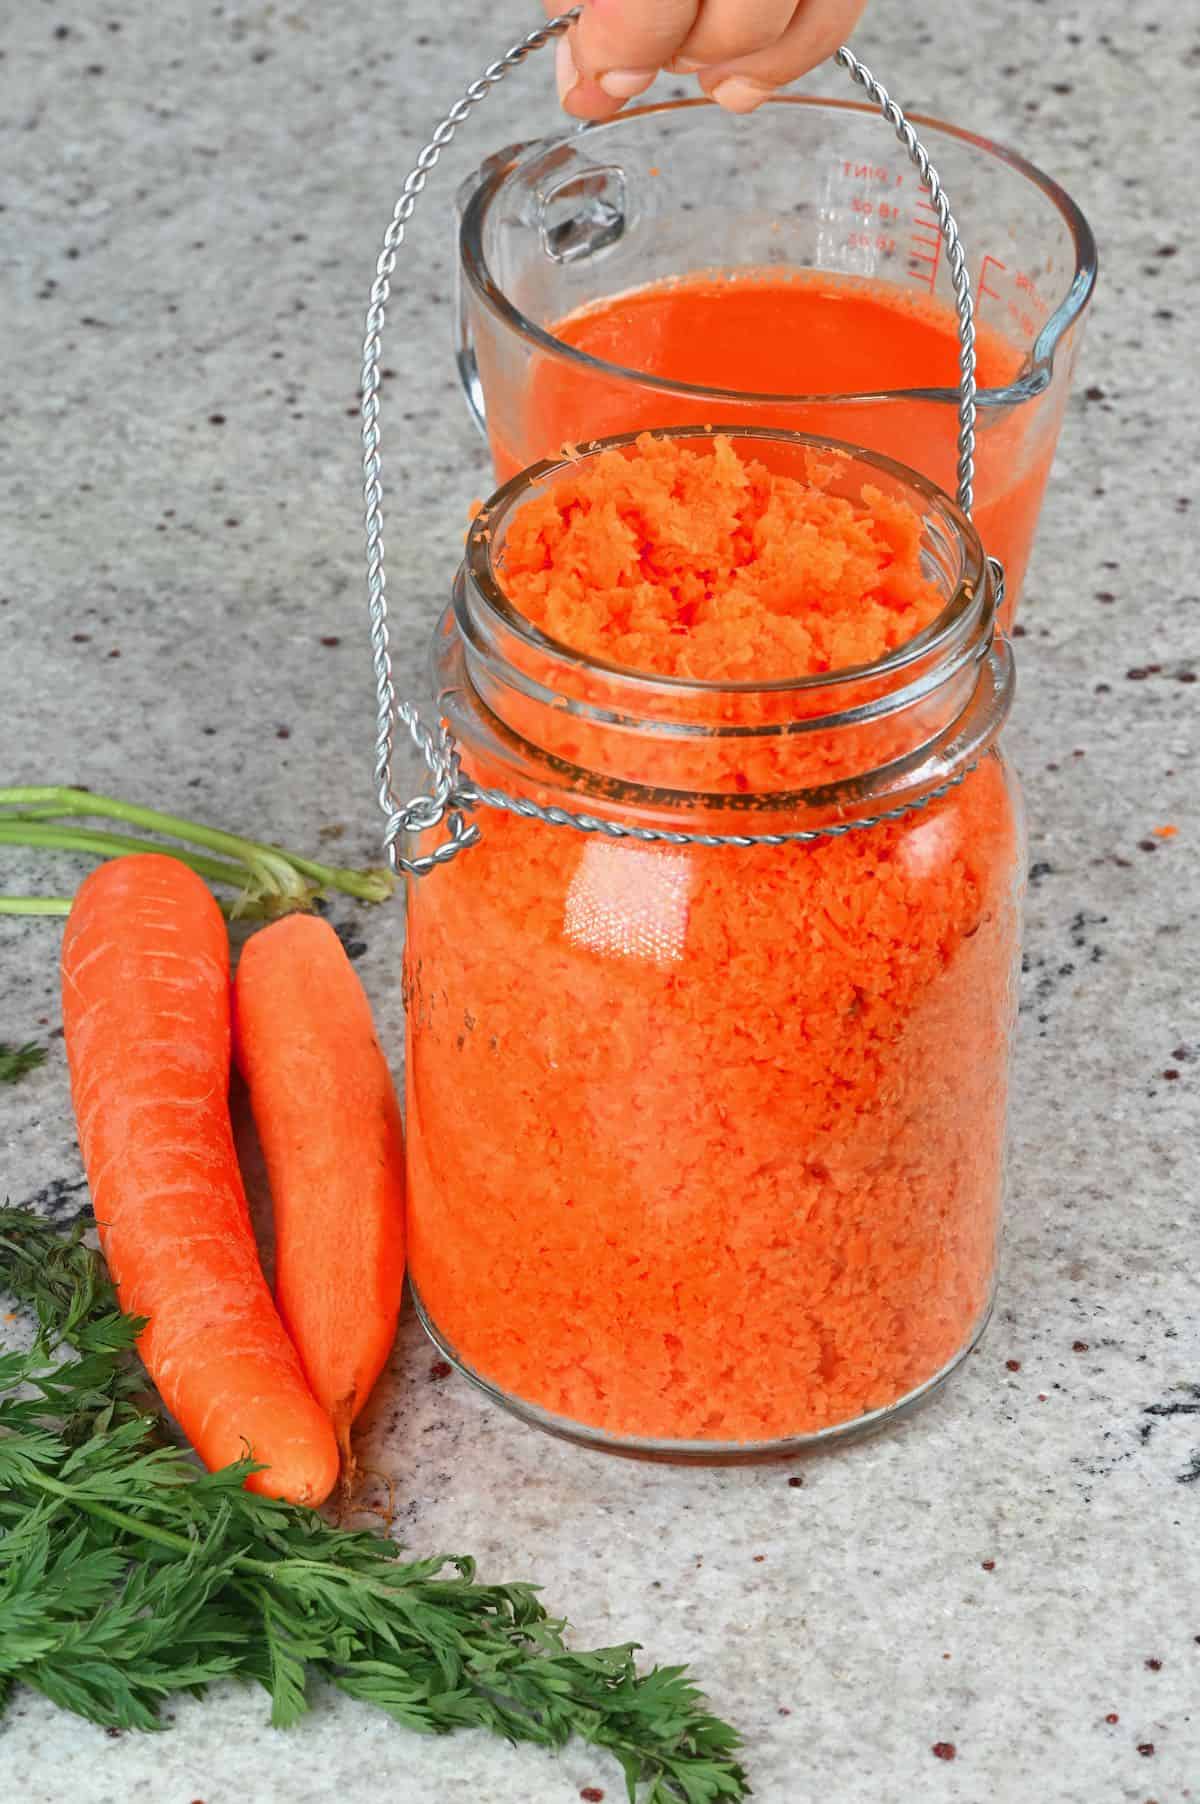 Carrot juice leftover pulp in a container